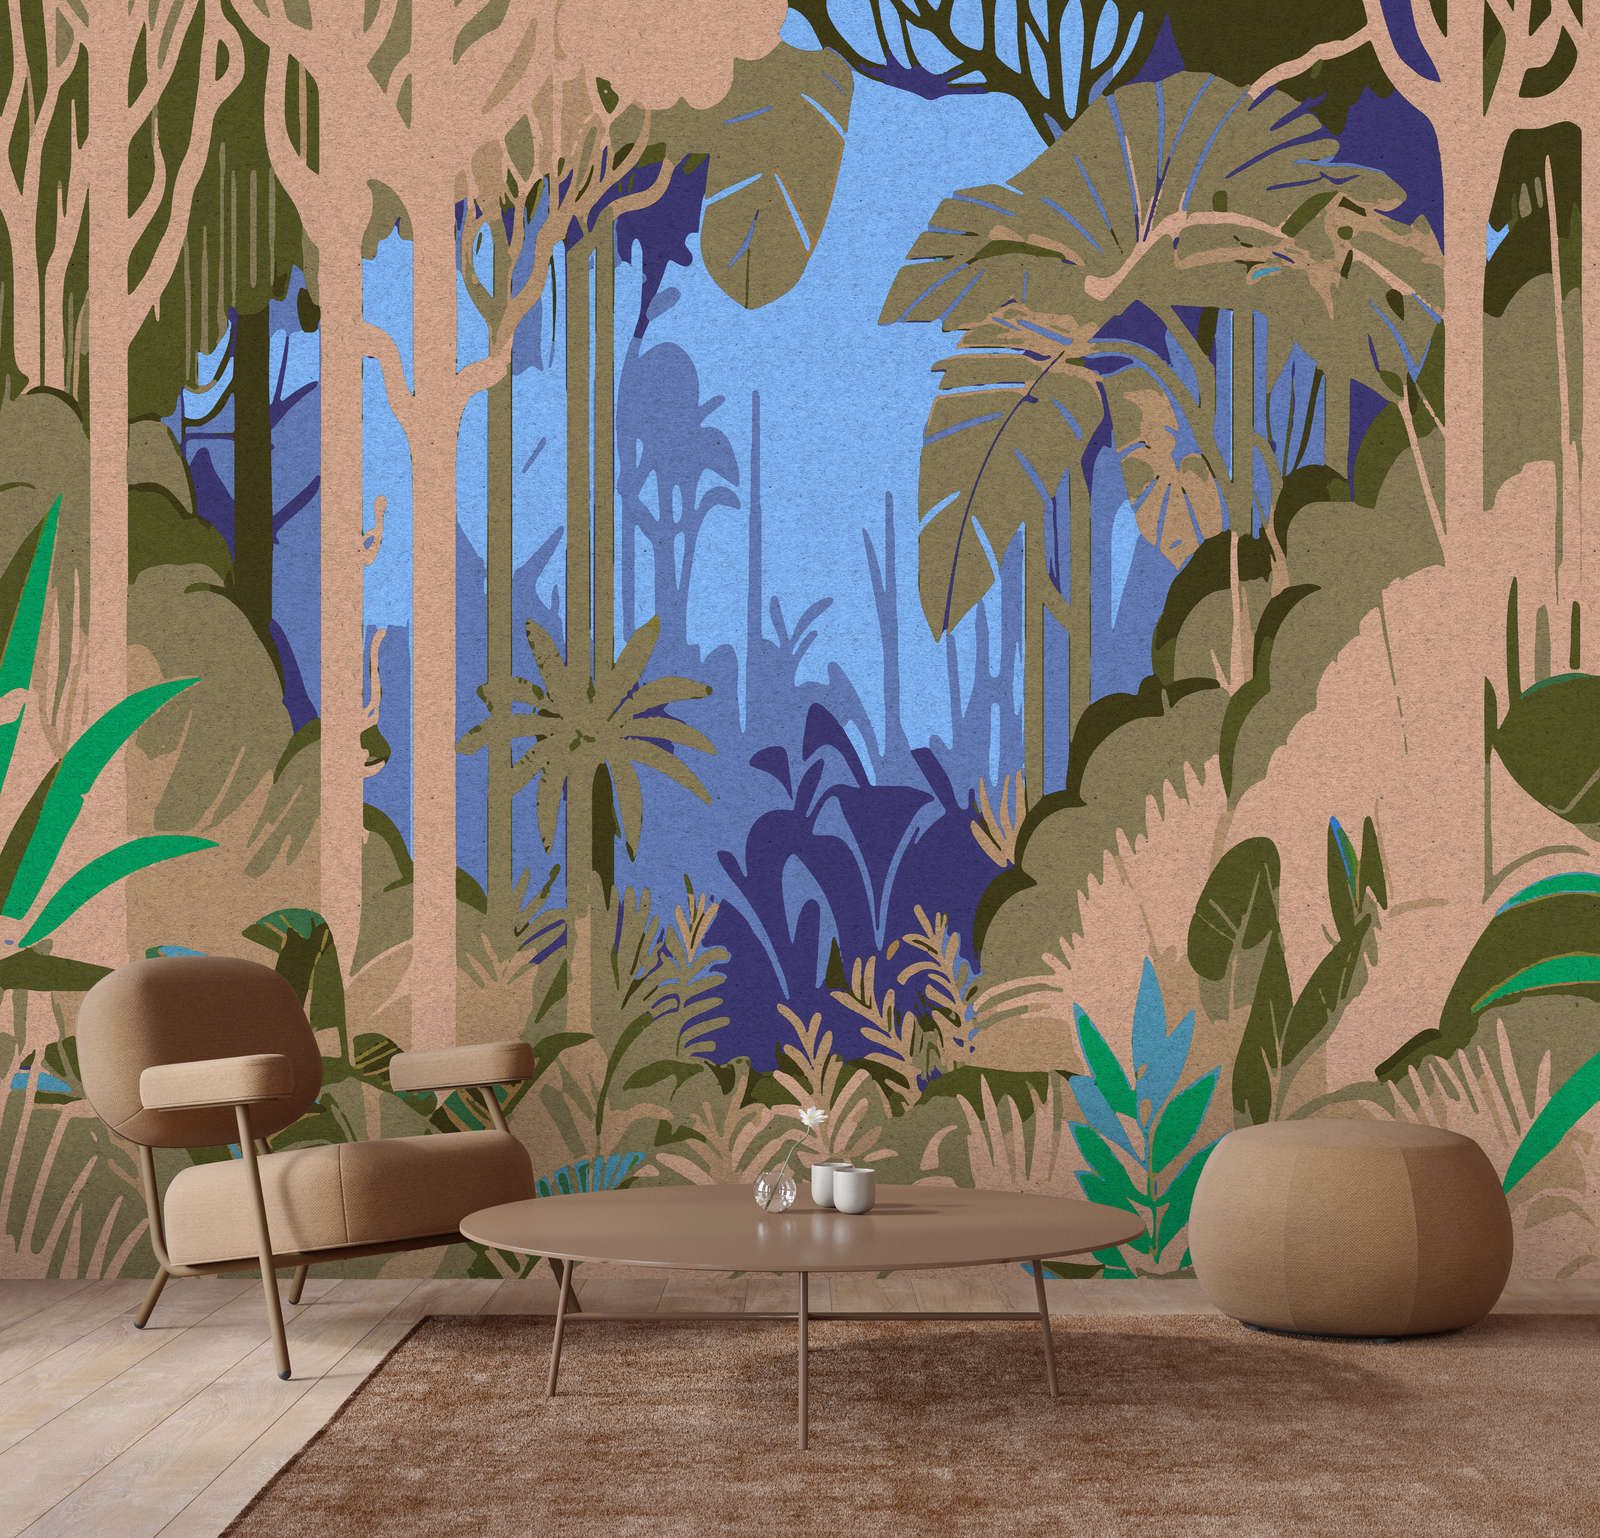             Photo wallpaper »azura« - Abstract jungle motif with kraft paper texture - Lightly textured non-woven fabric
        